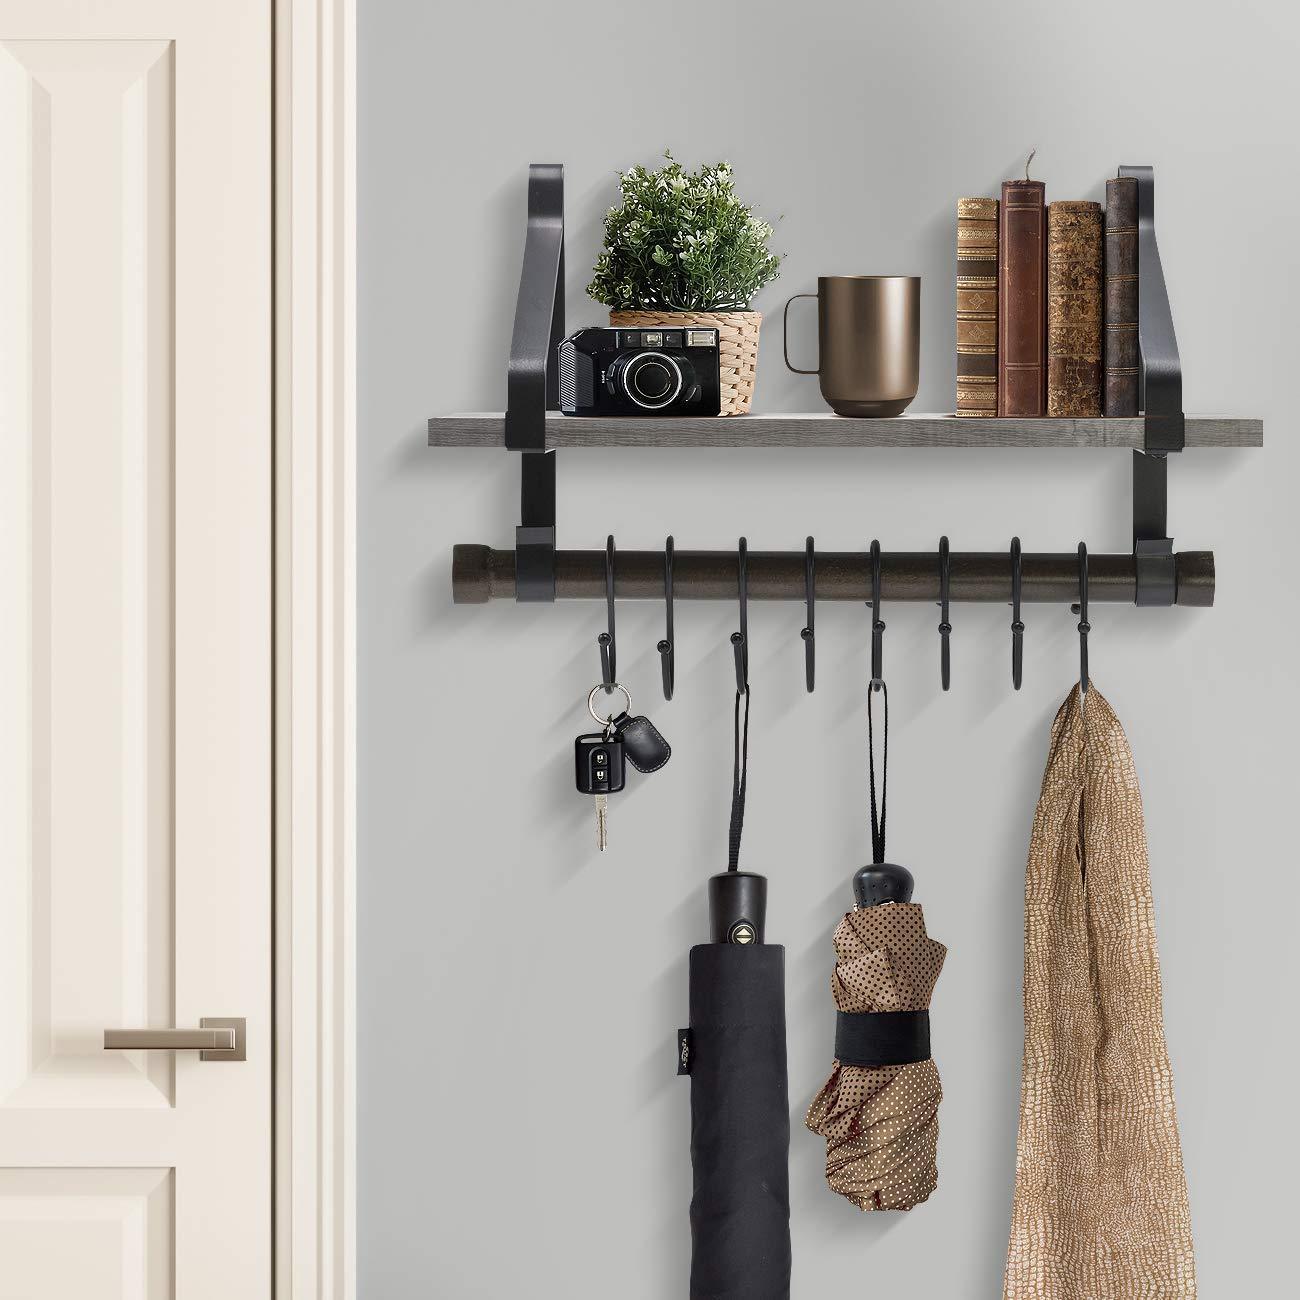 Buy now sorbus wall shelf with hooks rustic wood rack with towel bar and 8 removable hooks for wall mounted storage organization in kitchen bathroom hallway etc wall shelf grey